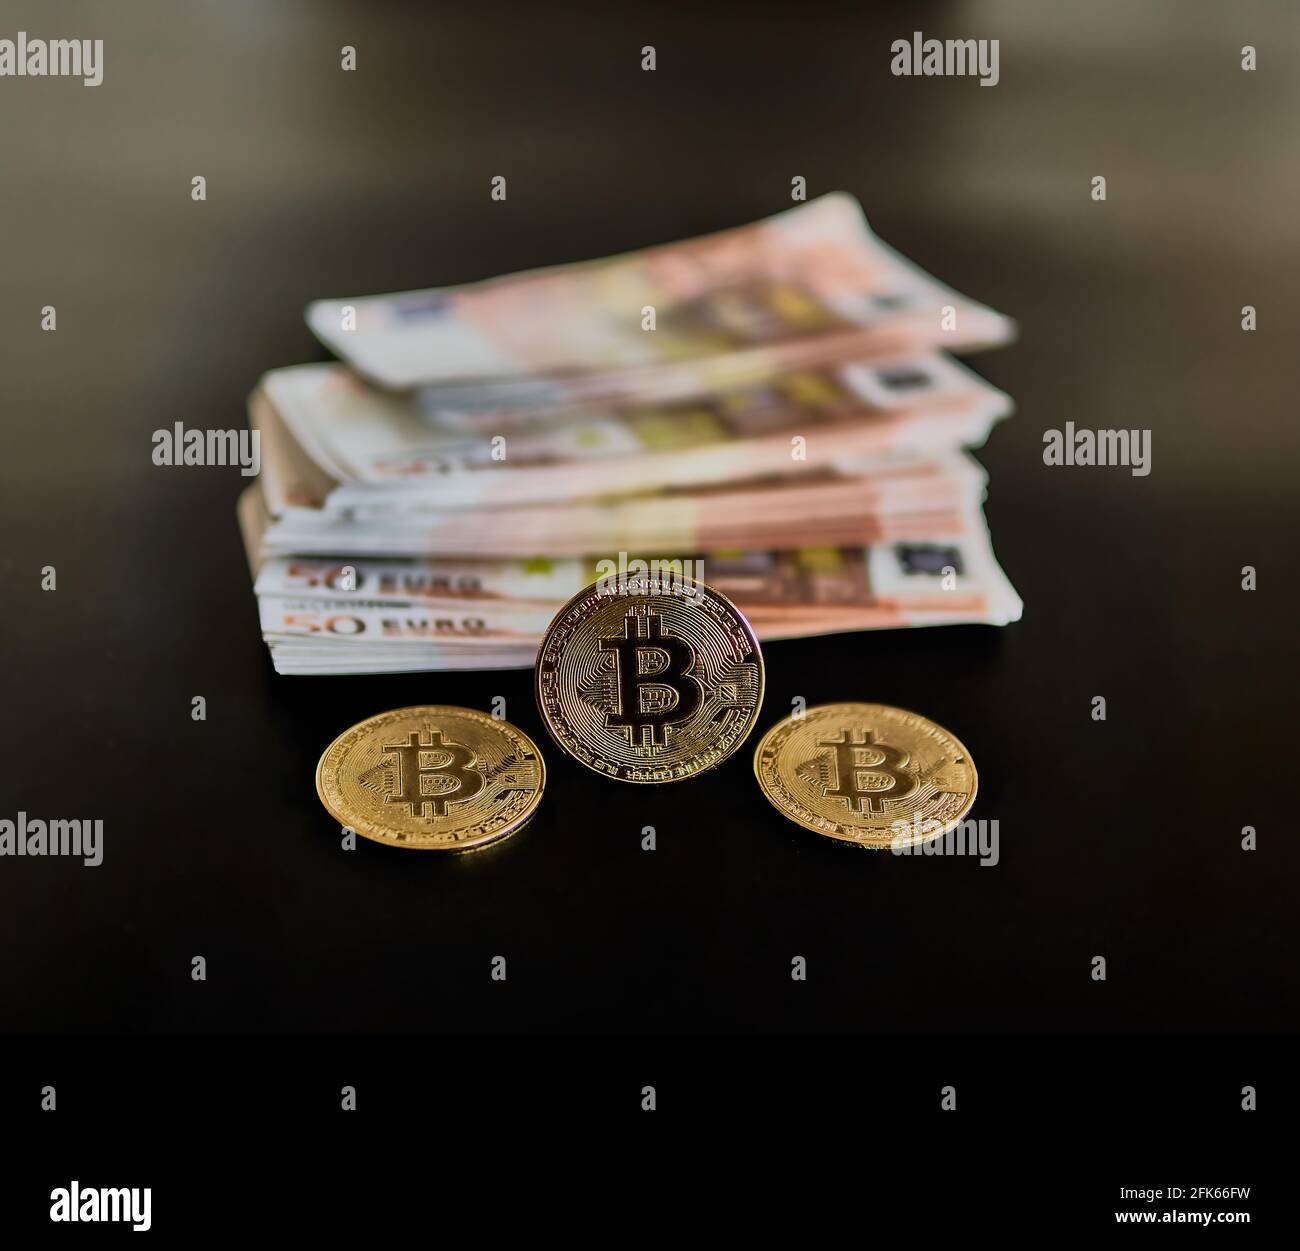 Three Bitcoin coins, along with several 50 euro bills. Concept of power, wealth, economy, Btc, anonymity. Selective focus. Stock Photo